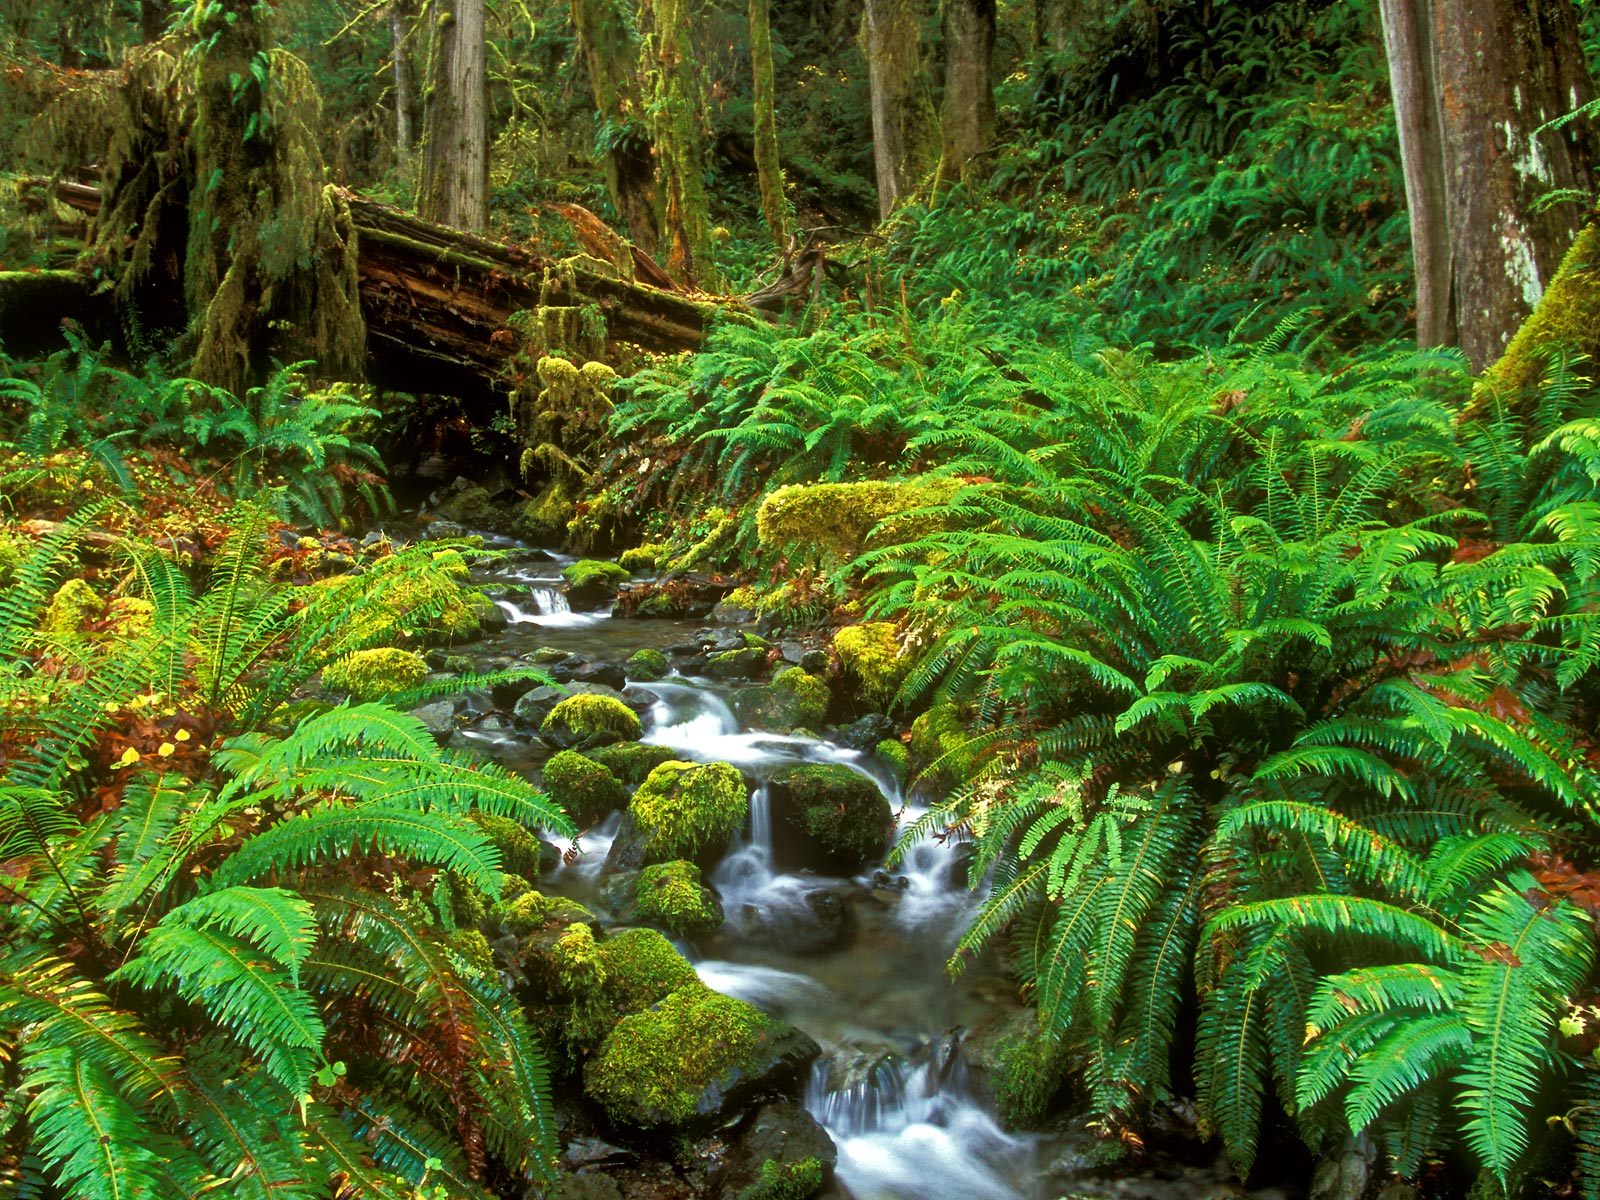  Stream Olympic National Park Washington Wallpaper Free HQ Wallpapers